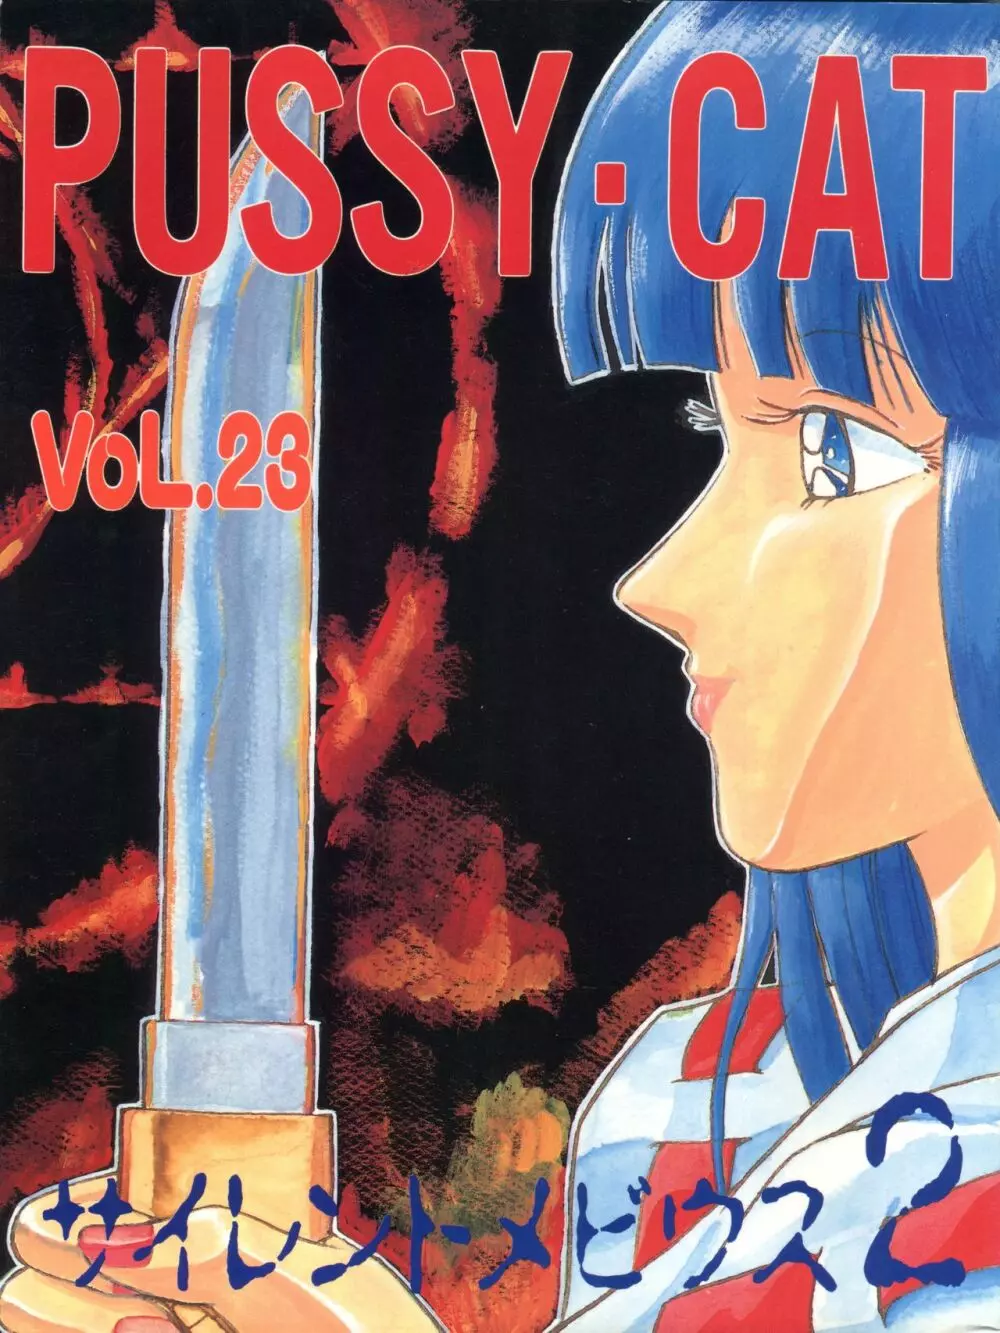 PUSSY・CAT VOL.23 サイレントメビウス2